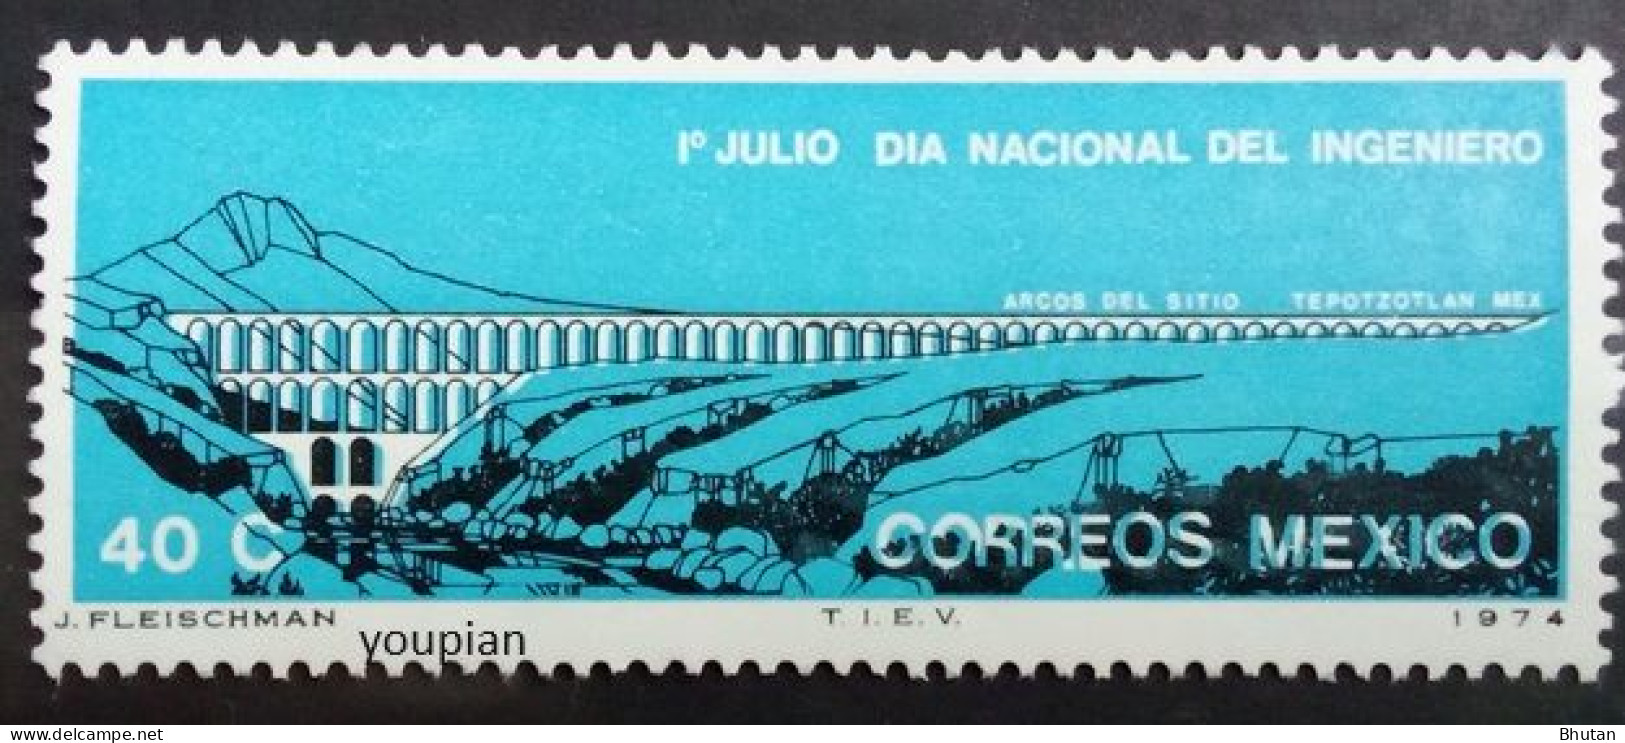 Mexico 1974, Day Of The Engineer, MNH Single Stamp - Mexico